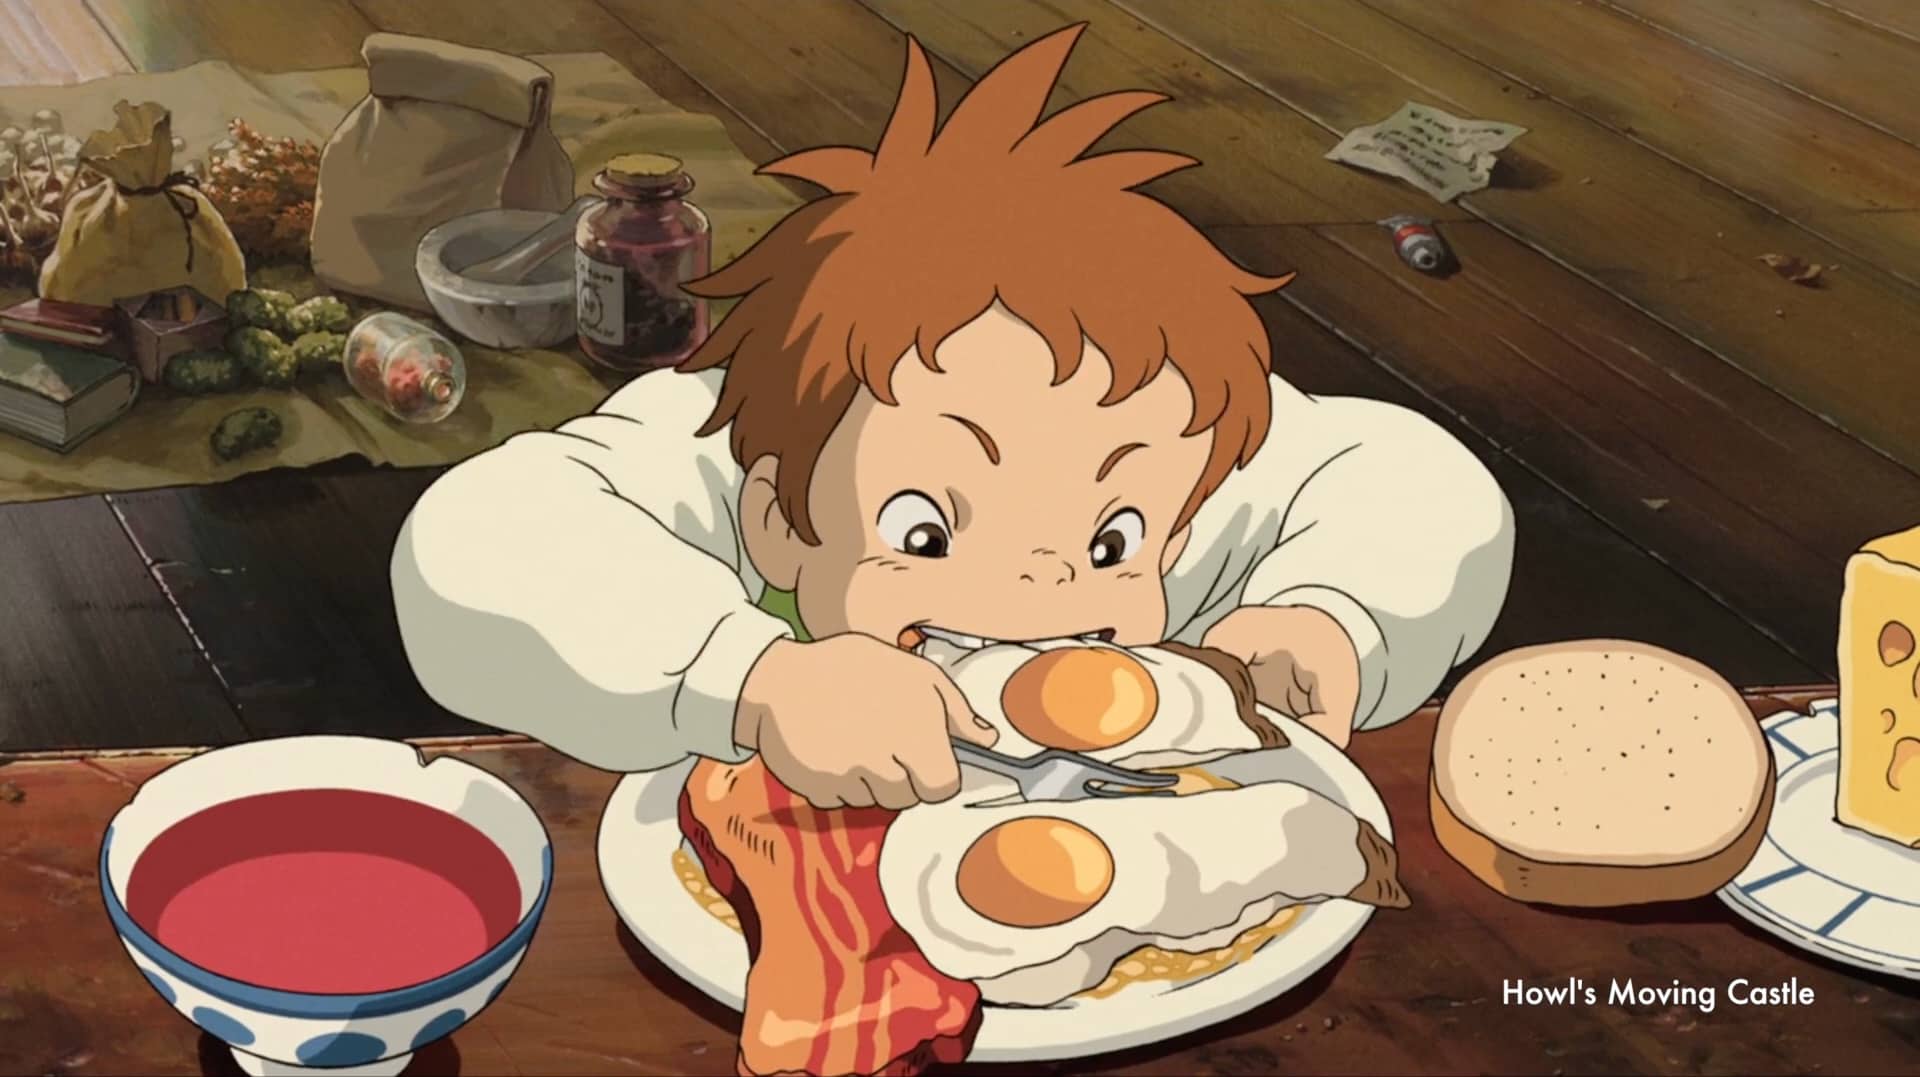 Single frame from the anime Howl's Moving Castle. The table is set with food: soup, bread, cheese, egg, and meat. A boy gobbles the eggs with enthusiasm.